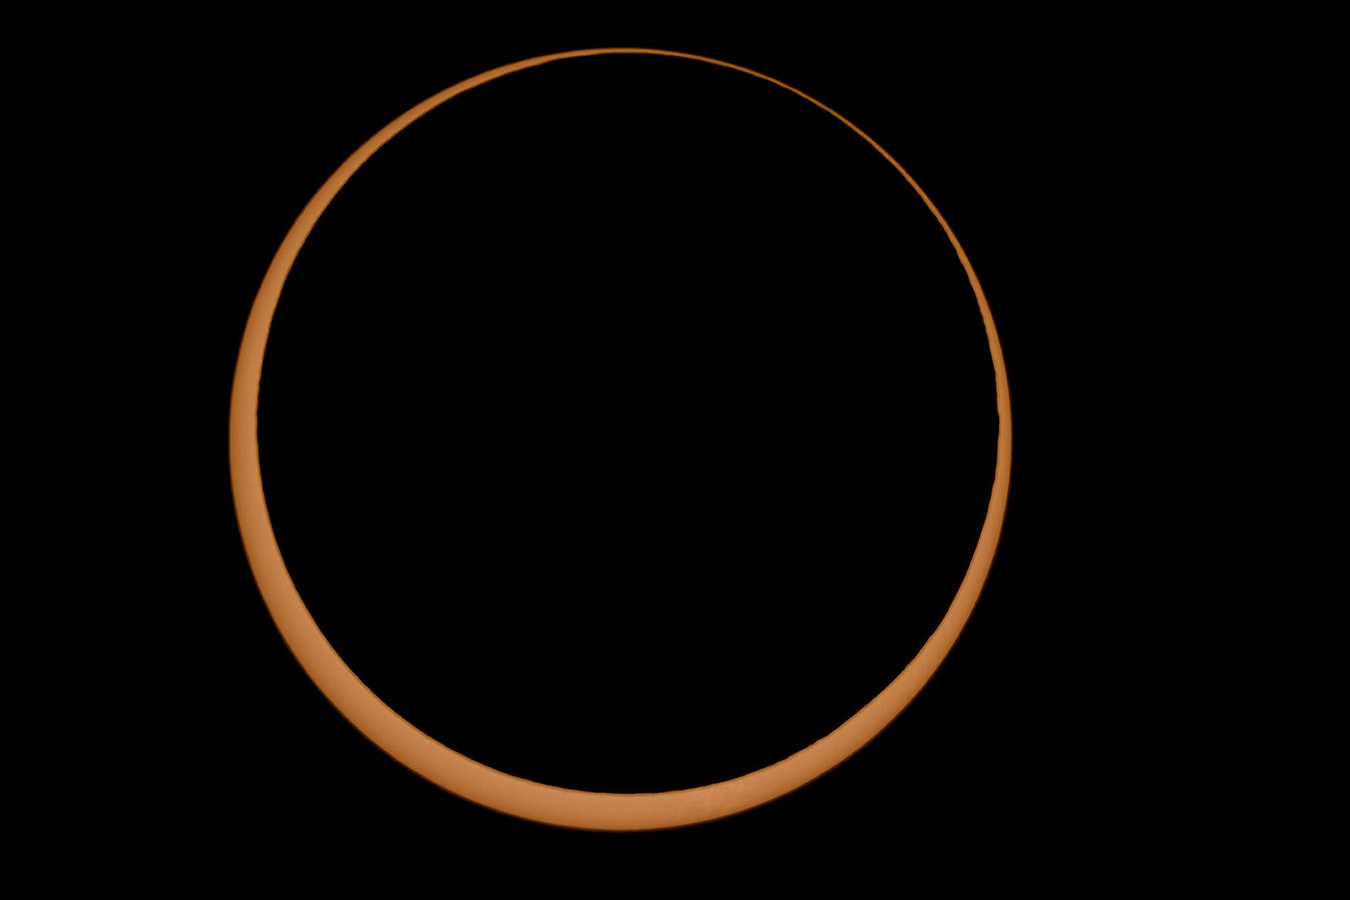 Saturday's annular eclipse is call a ring of fire because the moon moving in front of the sun seems smaller, leaving a ring of the sun showing.